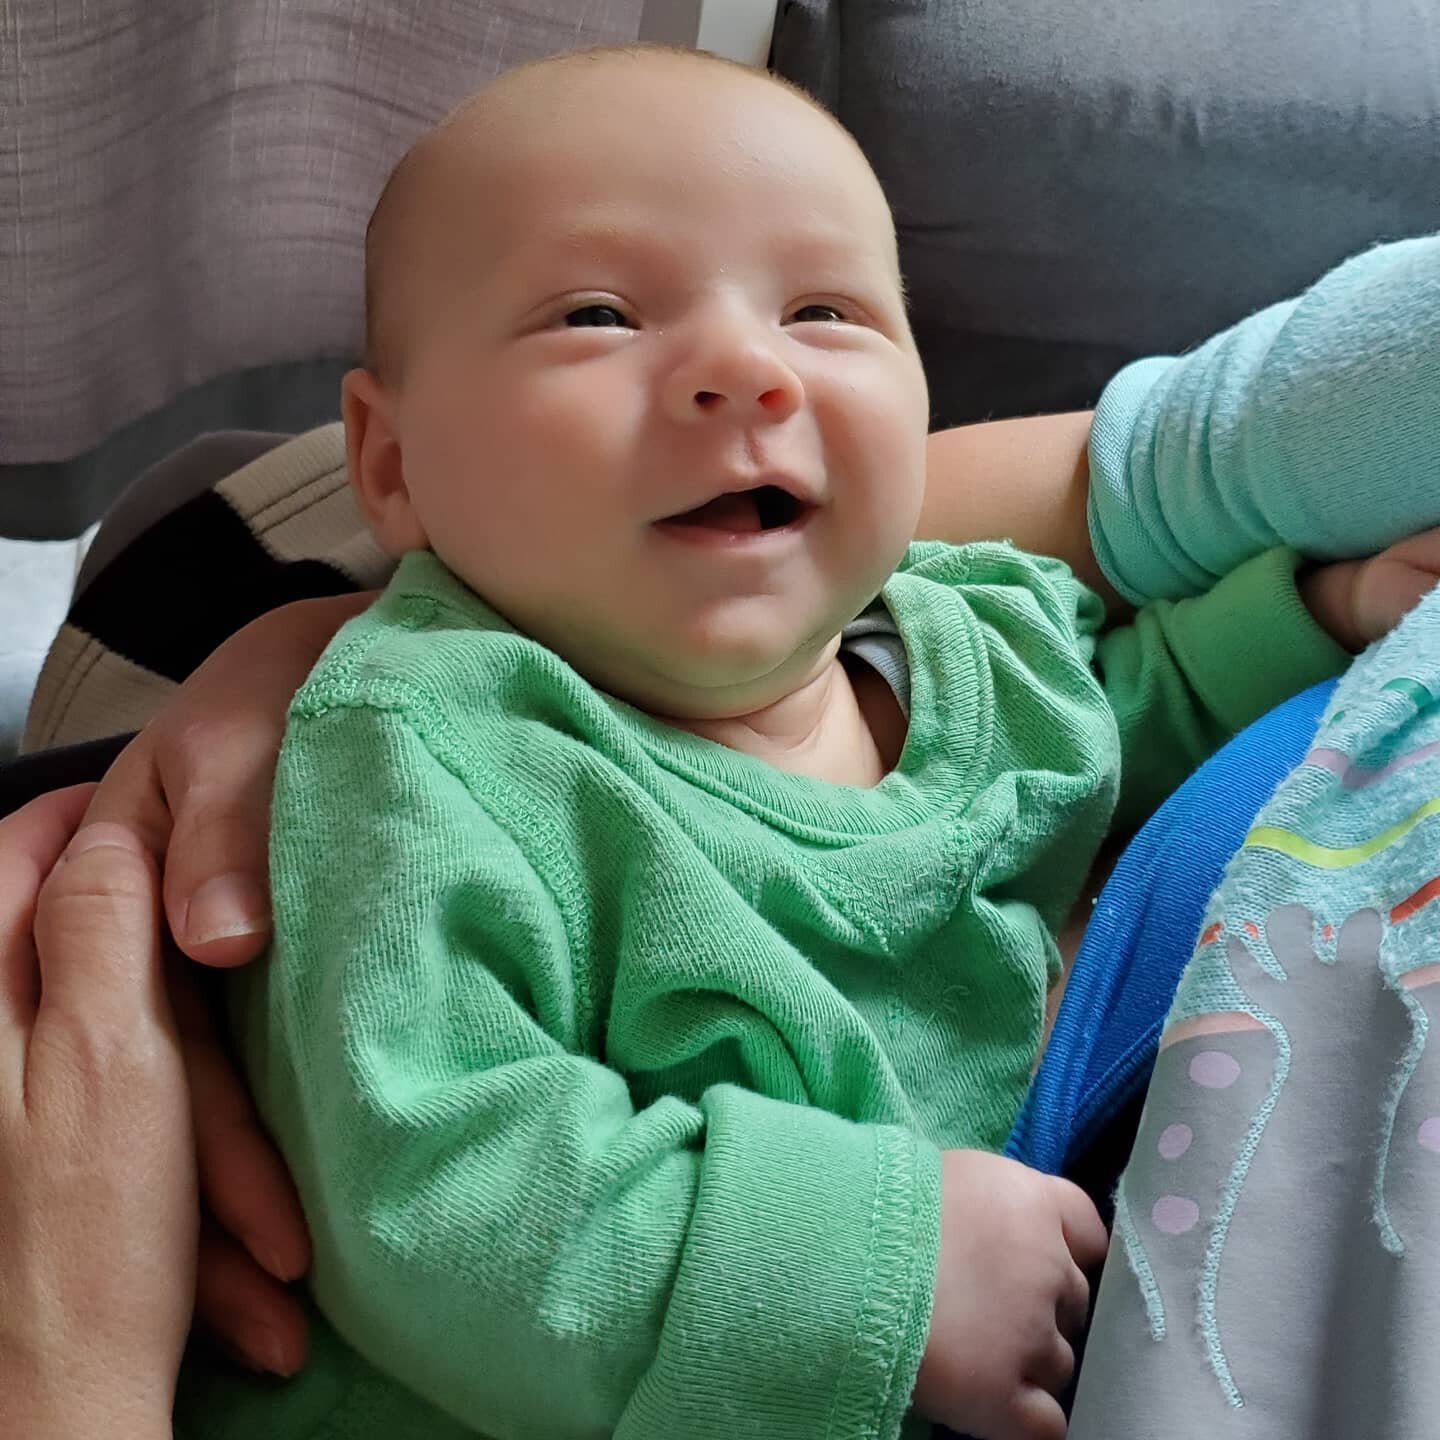 To be fair, he does smile sometimes. #milkdrunk #newborn